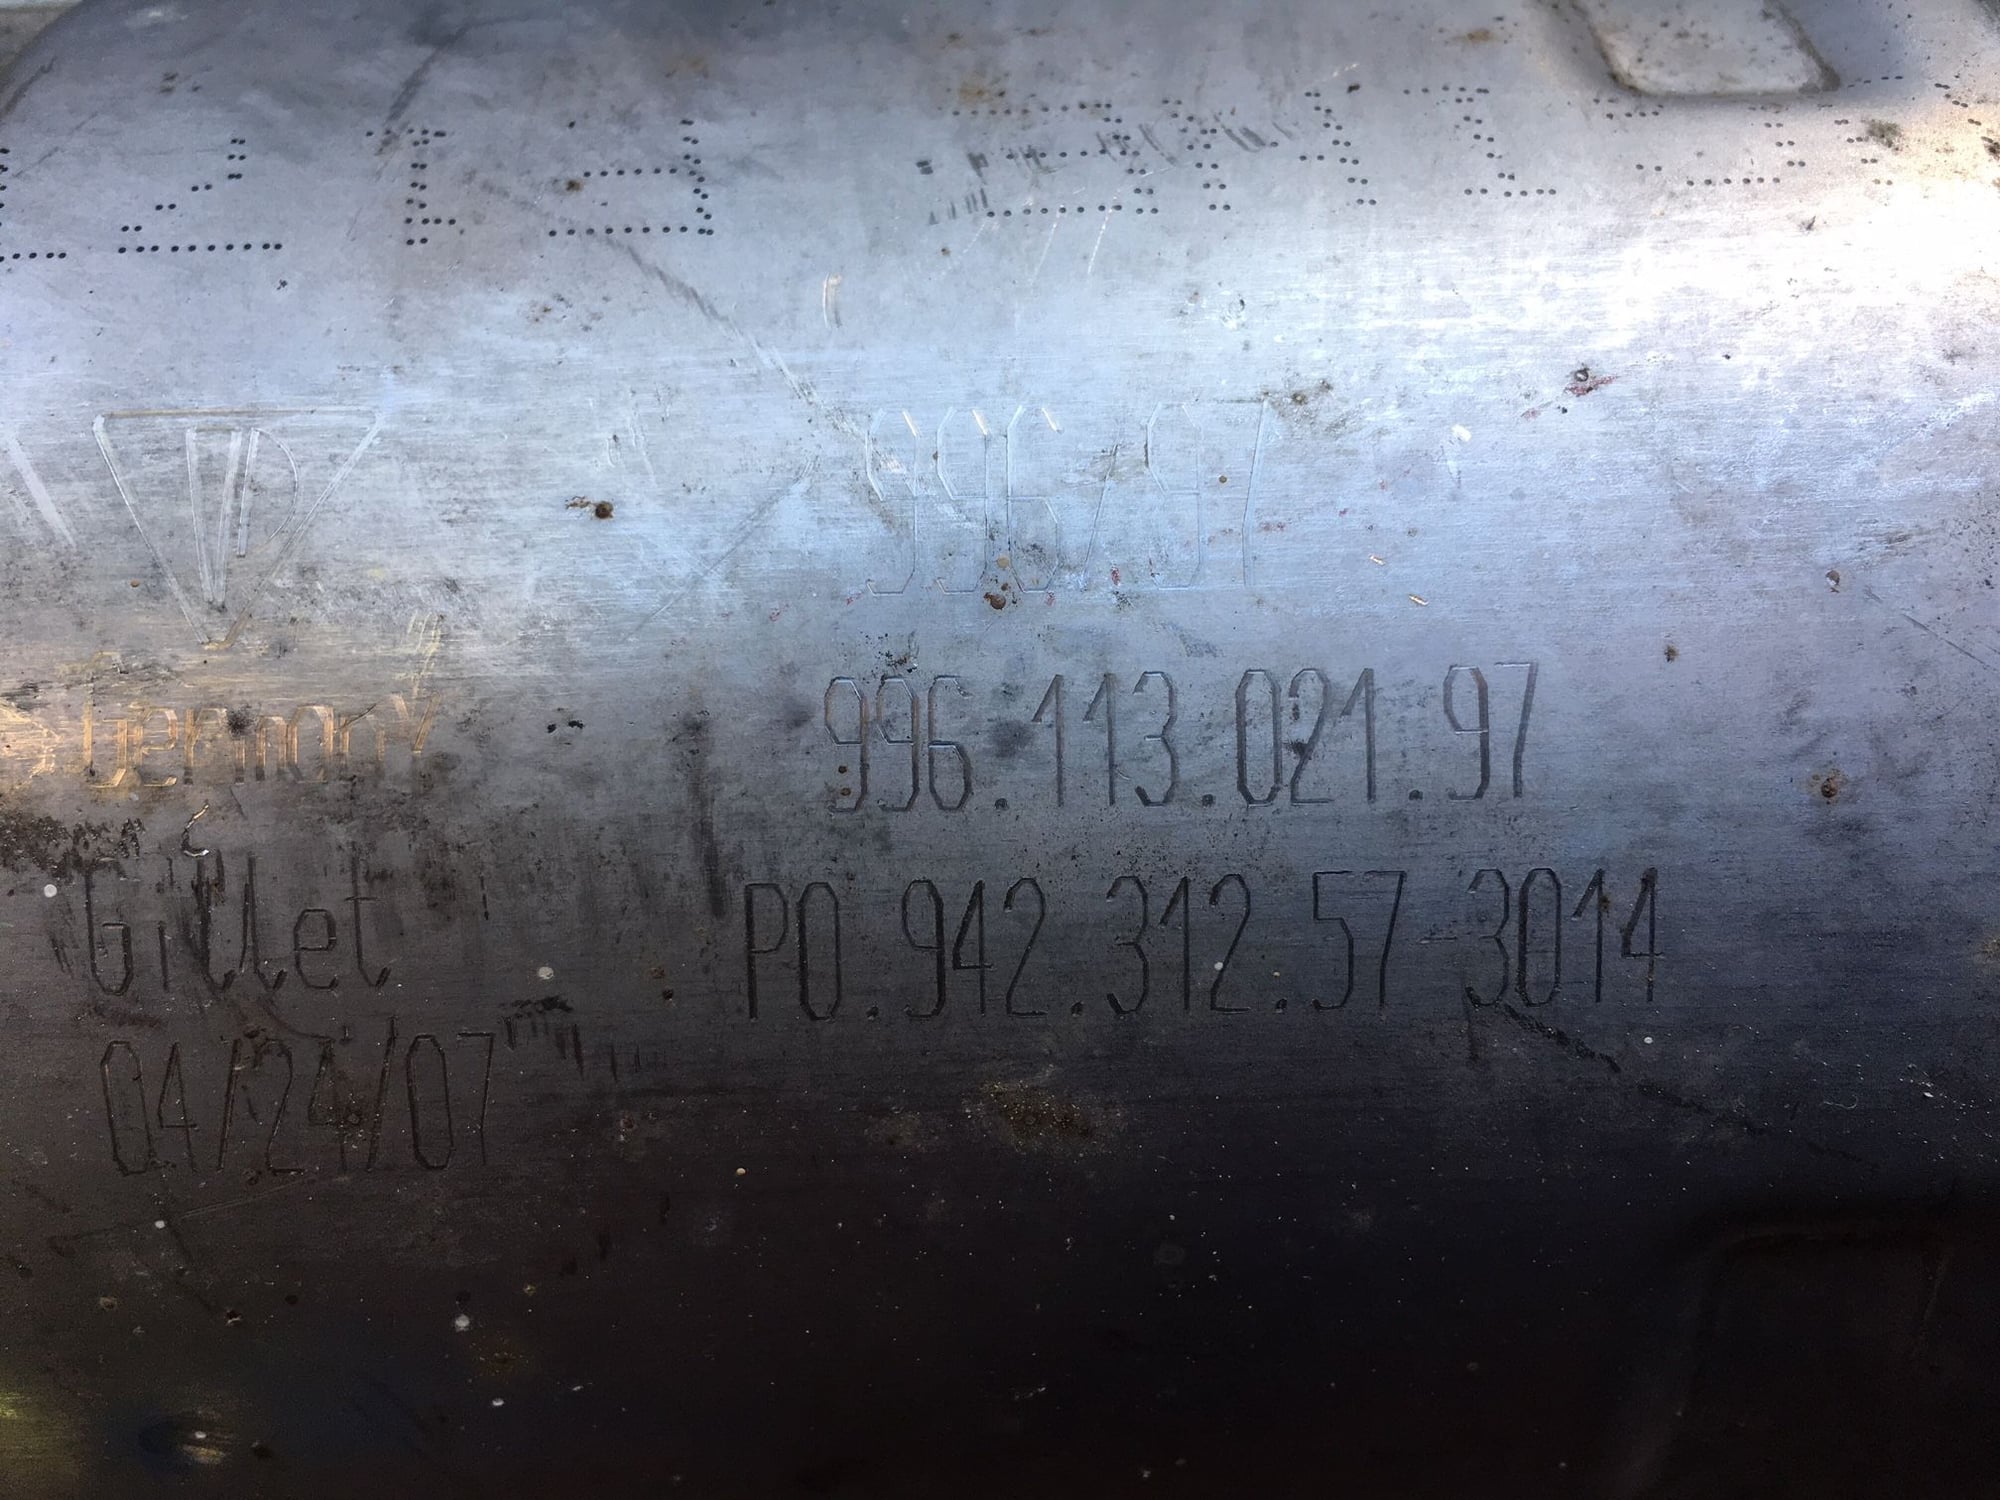 Engine - Exhaust - 996 Catalytic Converters - Used - All Years Porsche 911 - Westport, CT 06880, United States